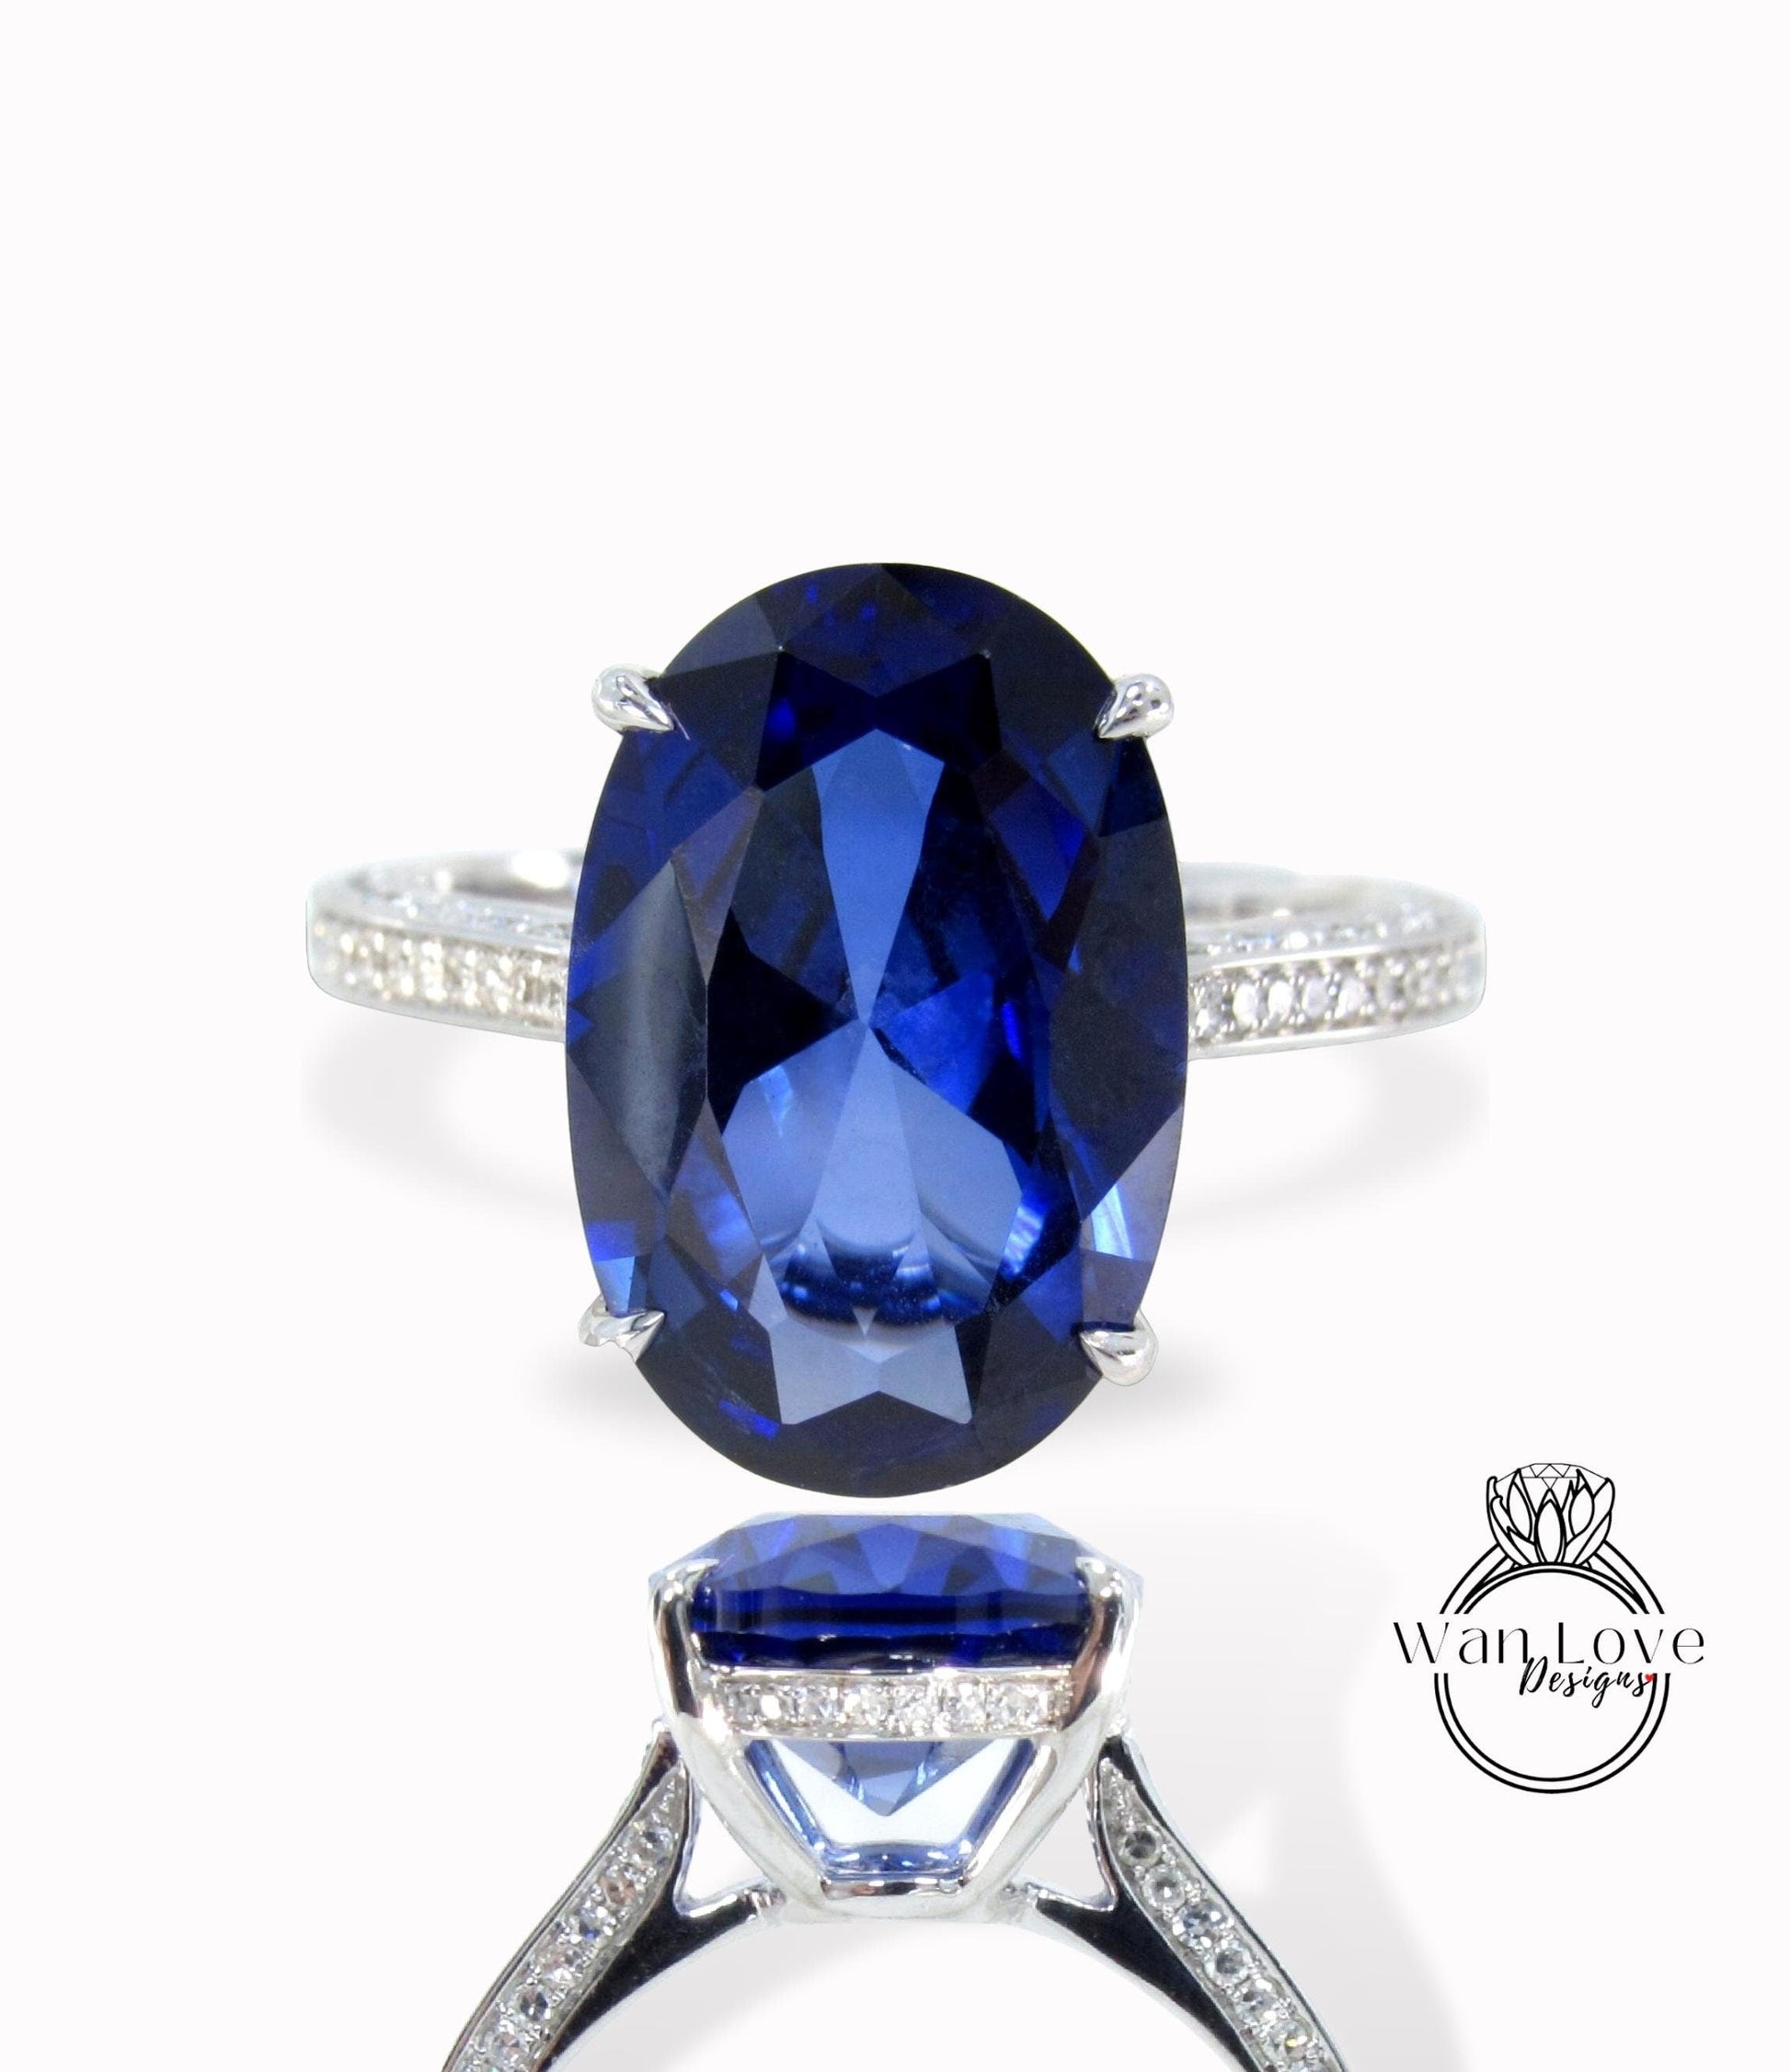 Blue Sapphire Celebrity Oval Diamond 3 sided shank Engagement Ring 9ct Sapphire 18k Rose Gold Wedding Anniversary Bridal Ring Ready to Ship Wan Love Designs